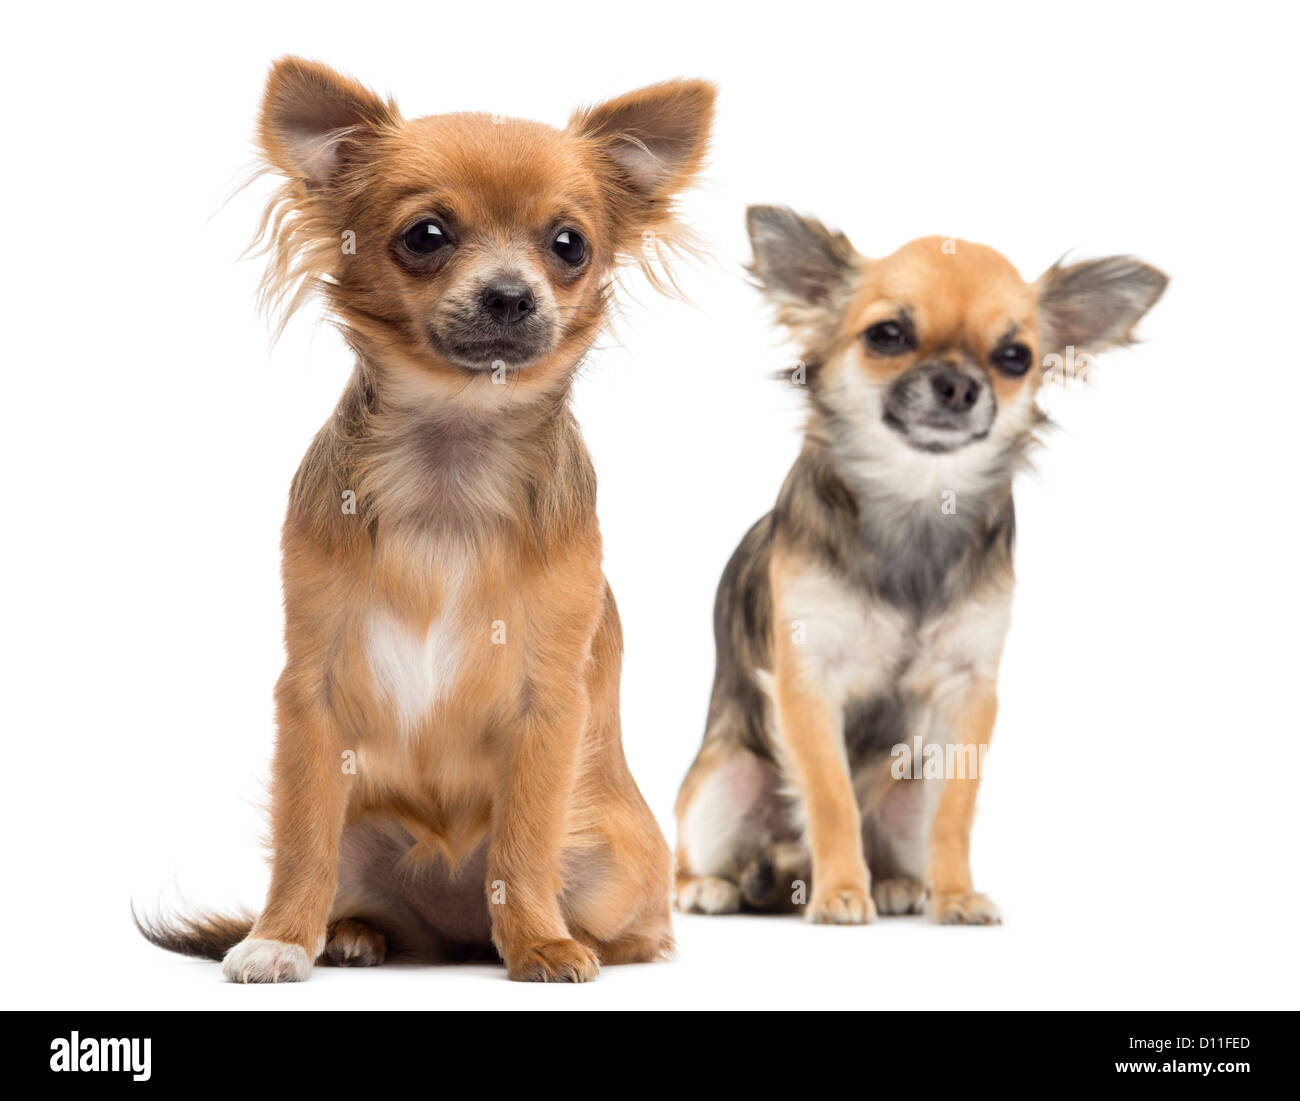 Two Chihuahuas sitting and looking away with focus on the one in the foreground against white background Stock Photo